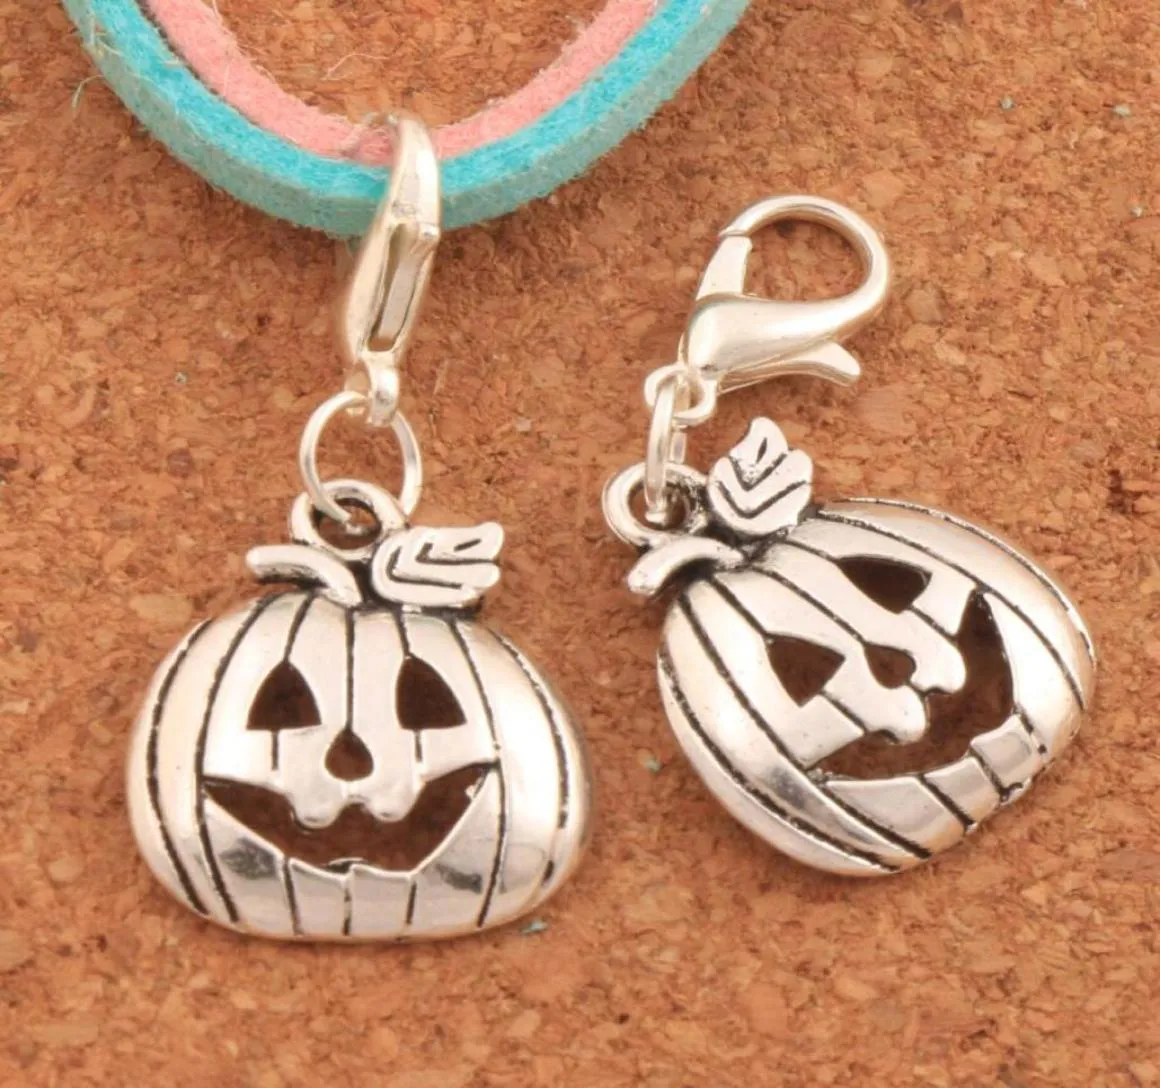 100pcslot Halloween Pumpkins Lobster Claw Clasp Charm Beads 323x159mm Antique silver Jewelry DIY C10981480028